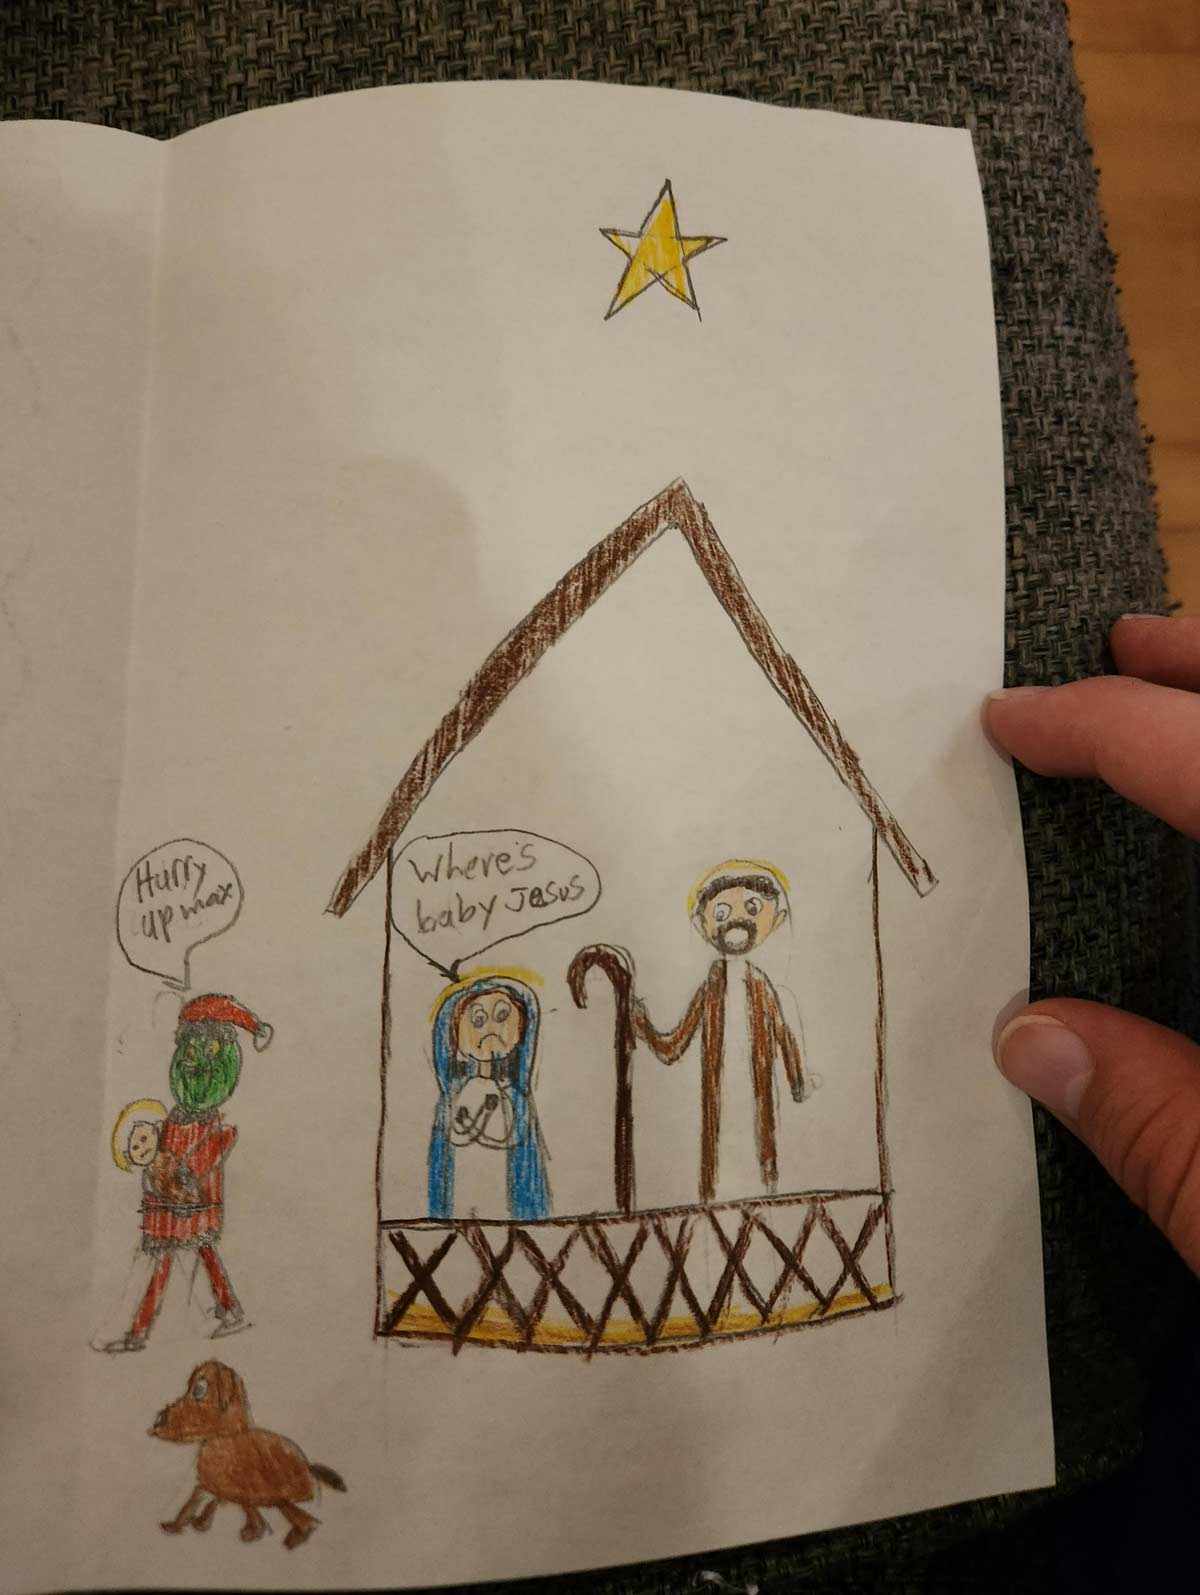 My 10 year old sister's Christmas card to me was the Grinch stealing baby Jesus